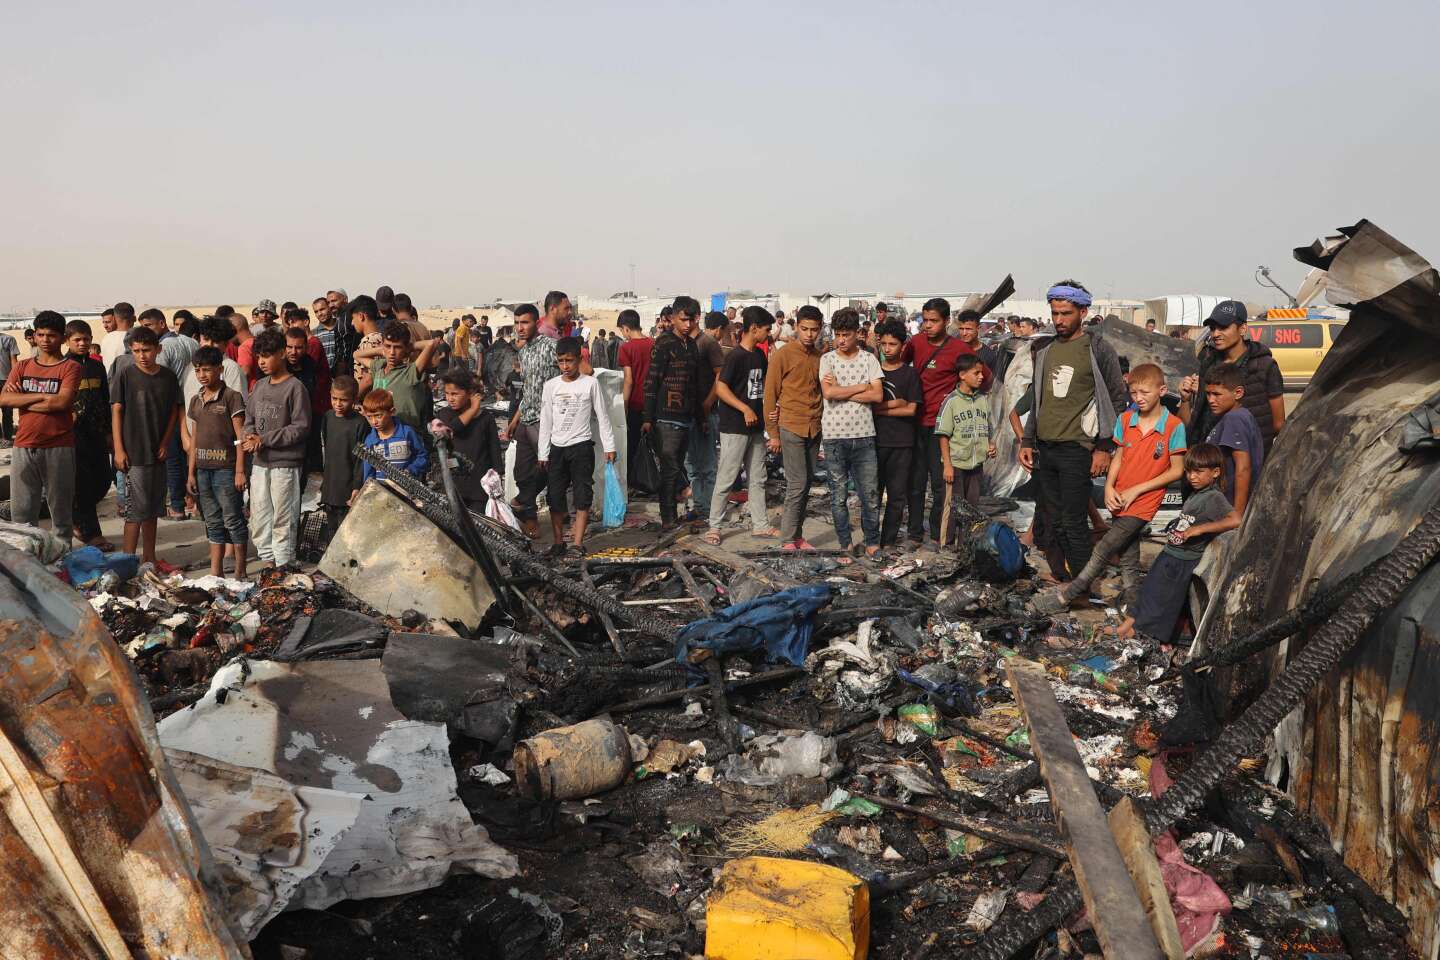 Despite the outrage after the bombing of the refugee camp, the new attacks on Rafah